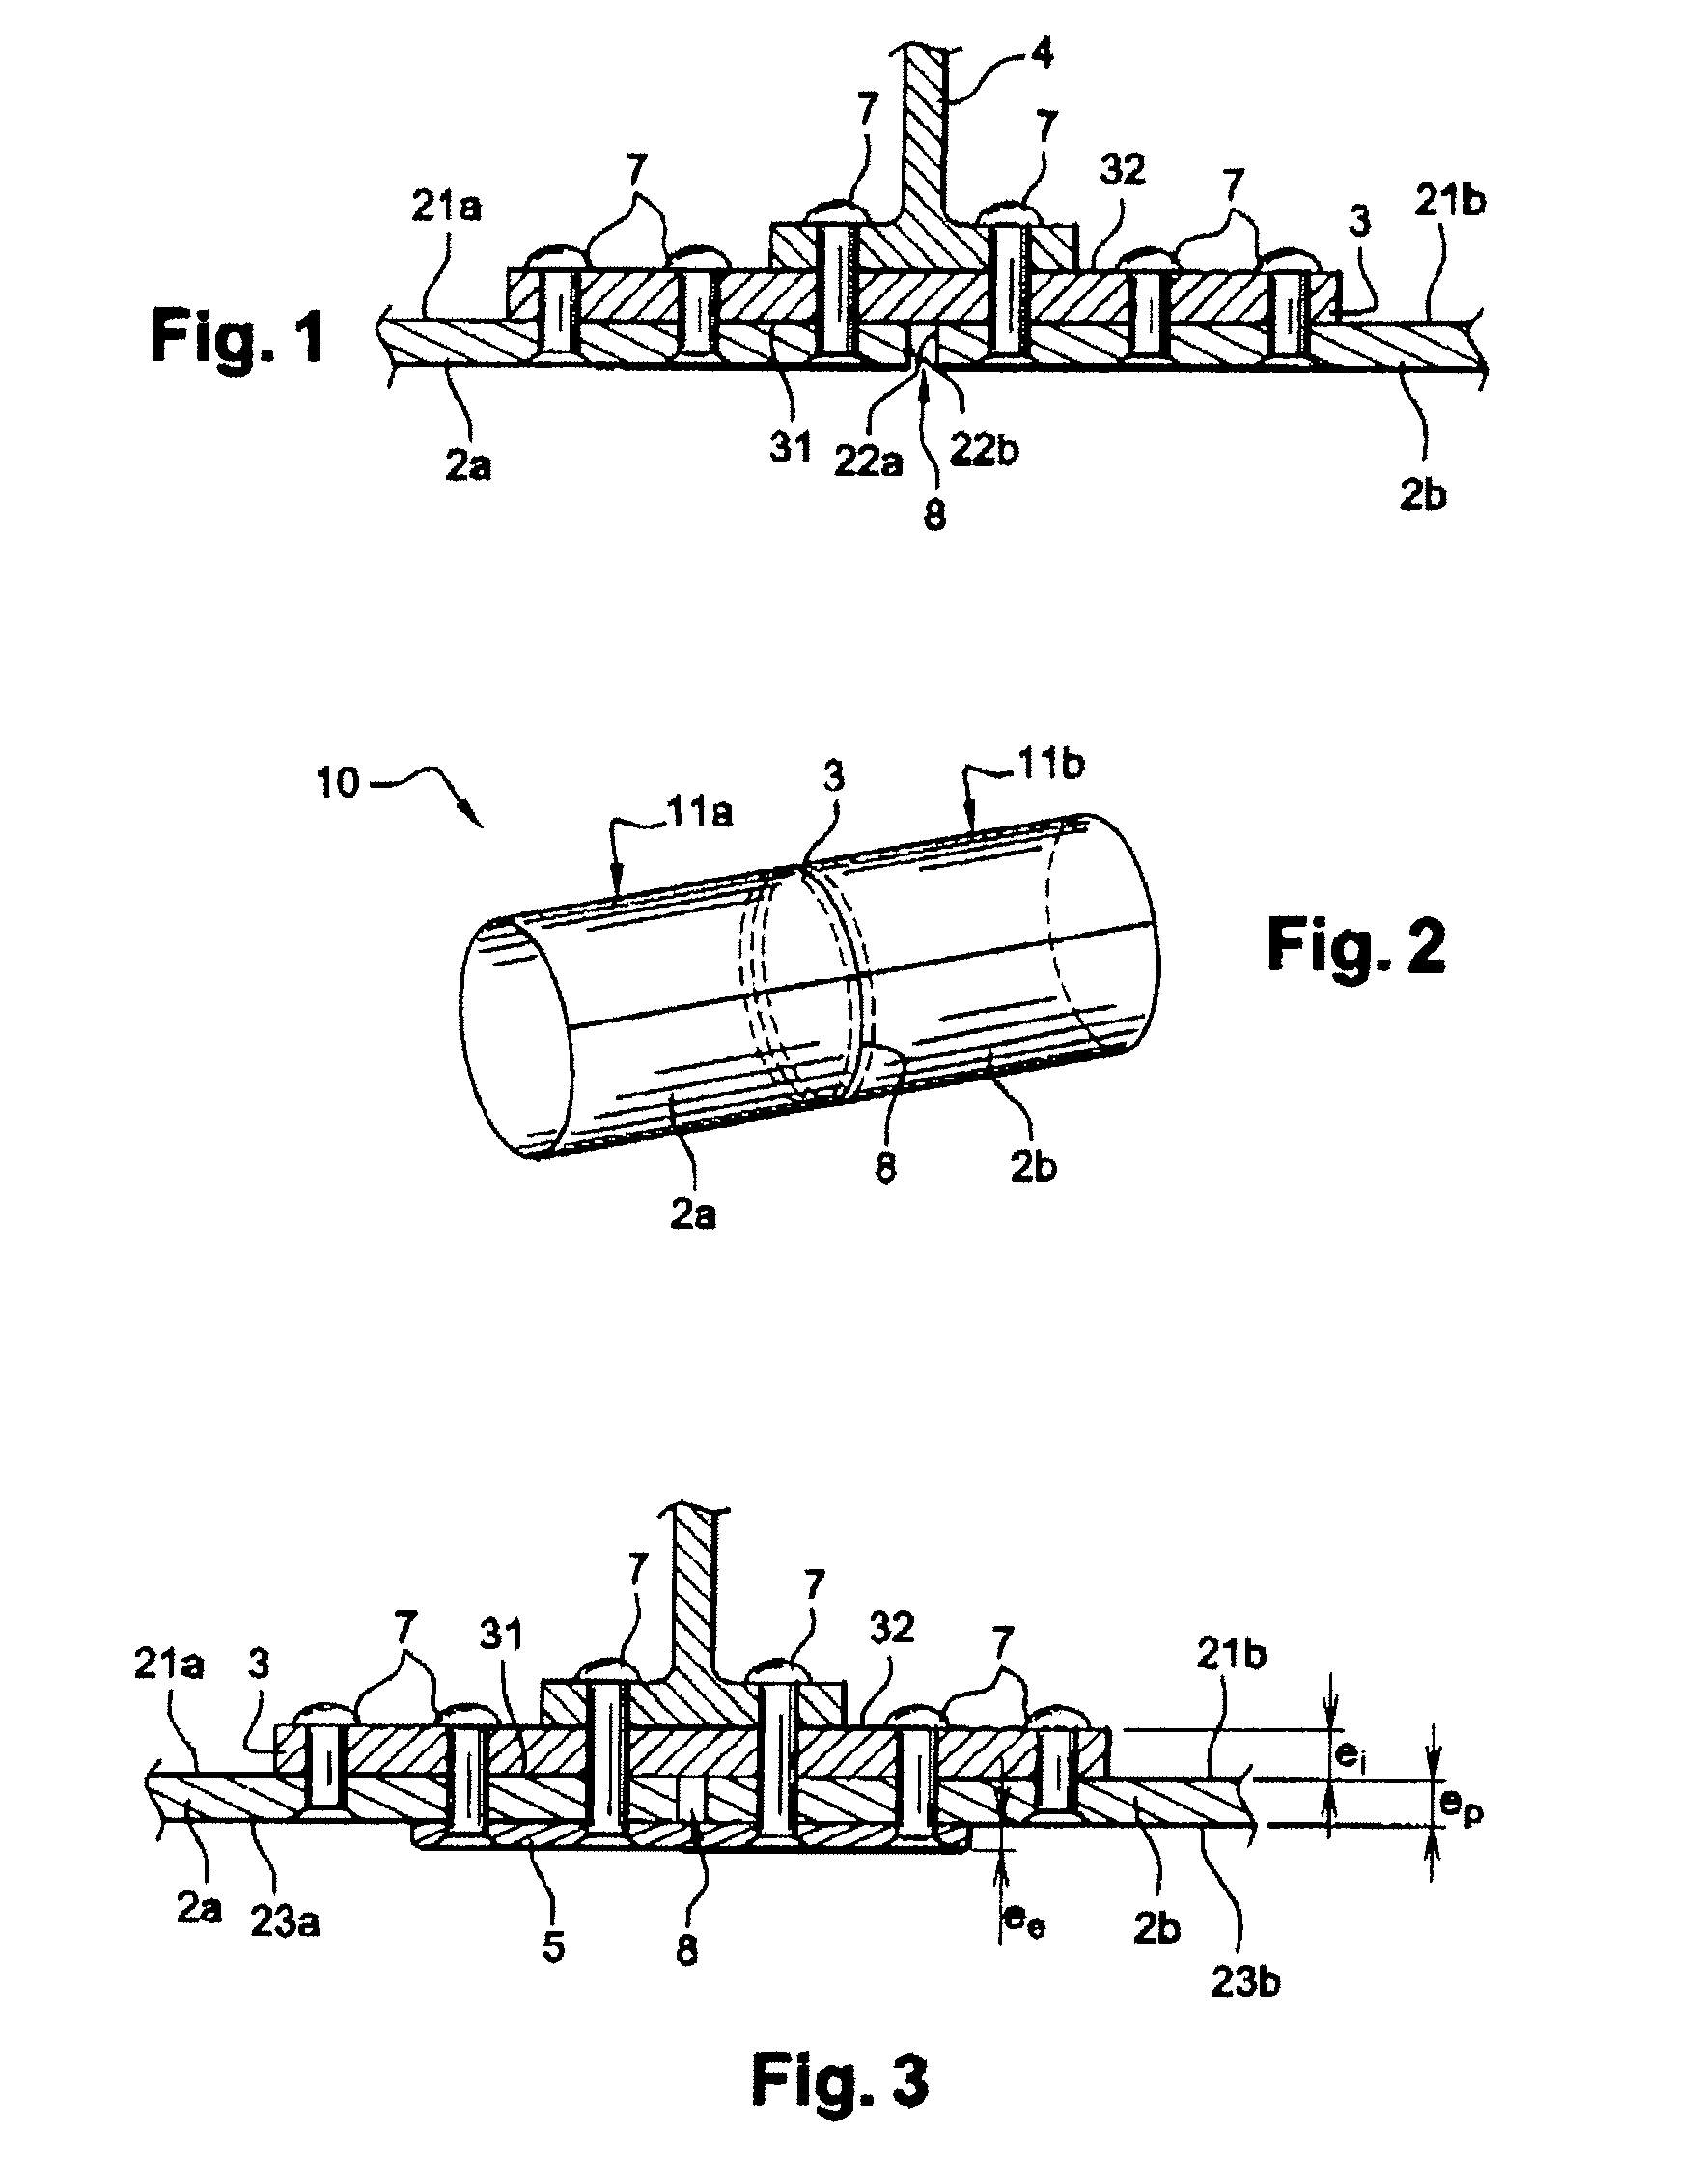 Assembly of panels of an airplane fuselage